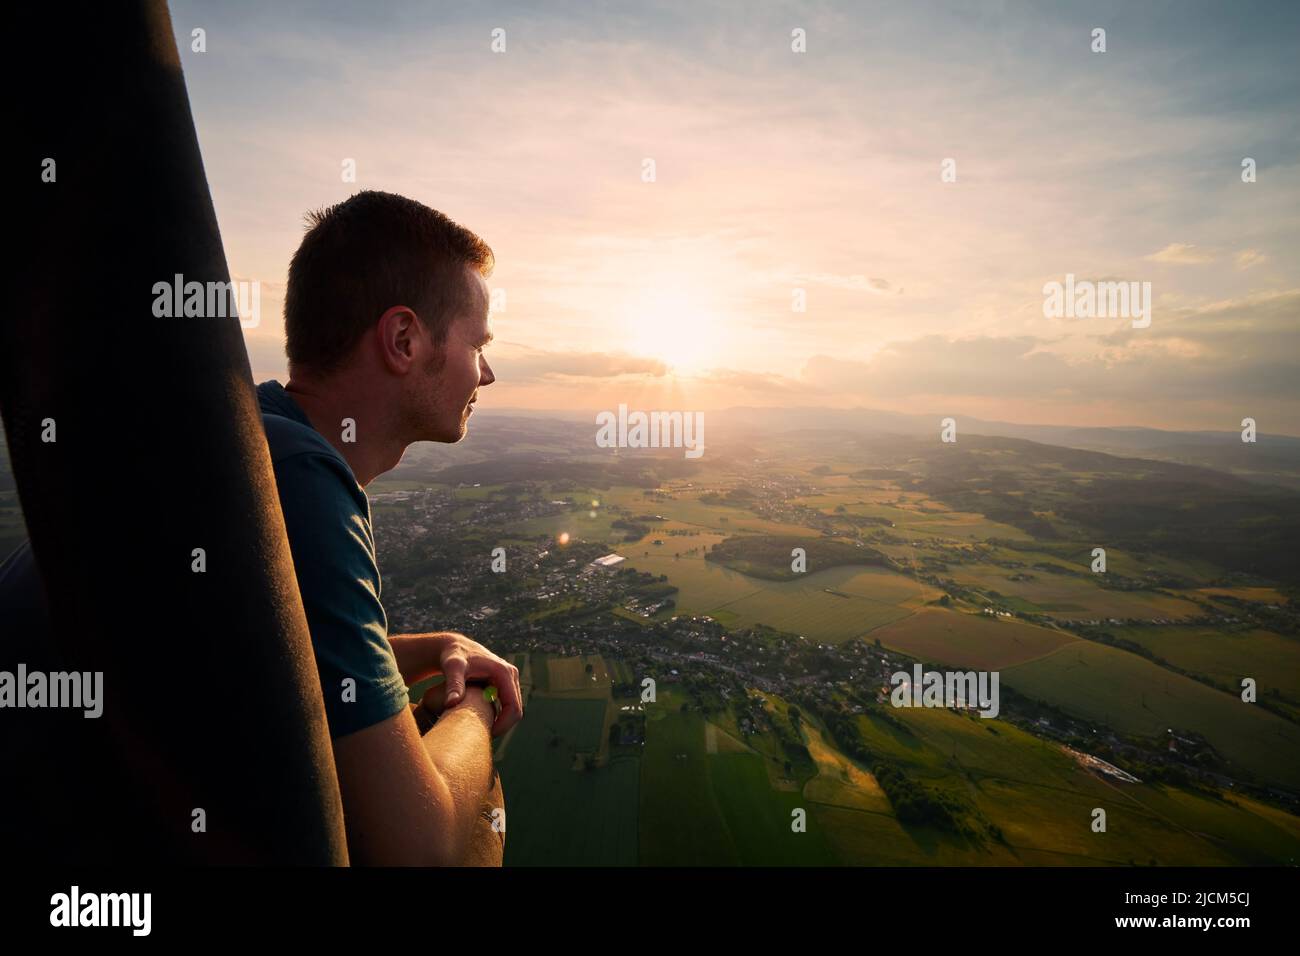 Man enjoying view from hot air balloon during flight over beautiful landscape at sunset. Themes adventure, freedom and travel. Stock Photo